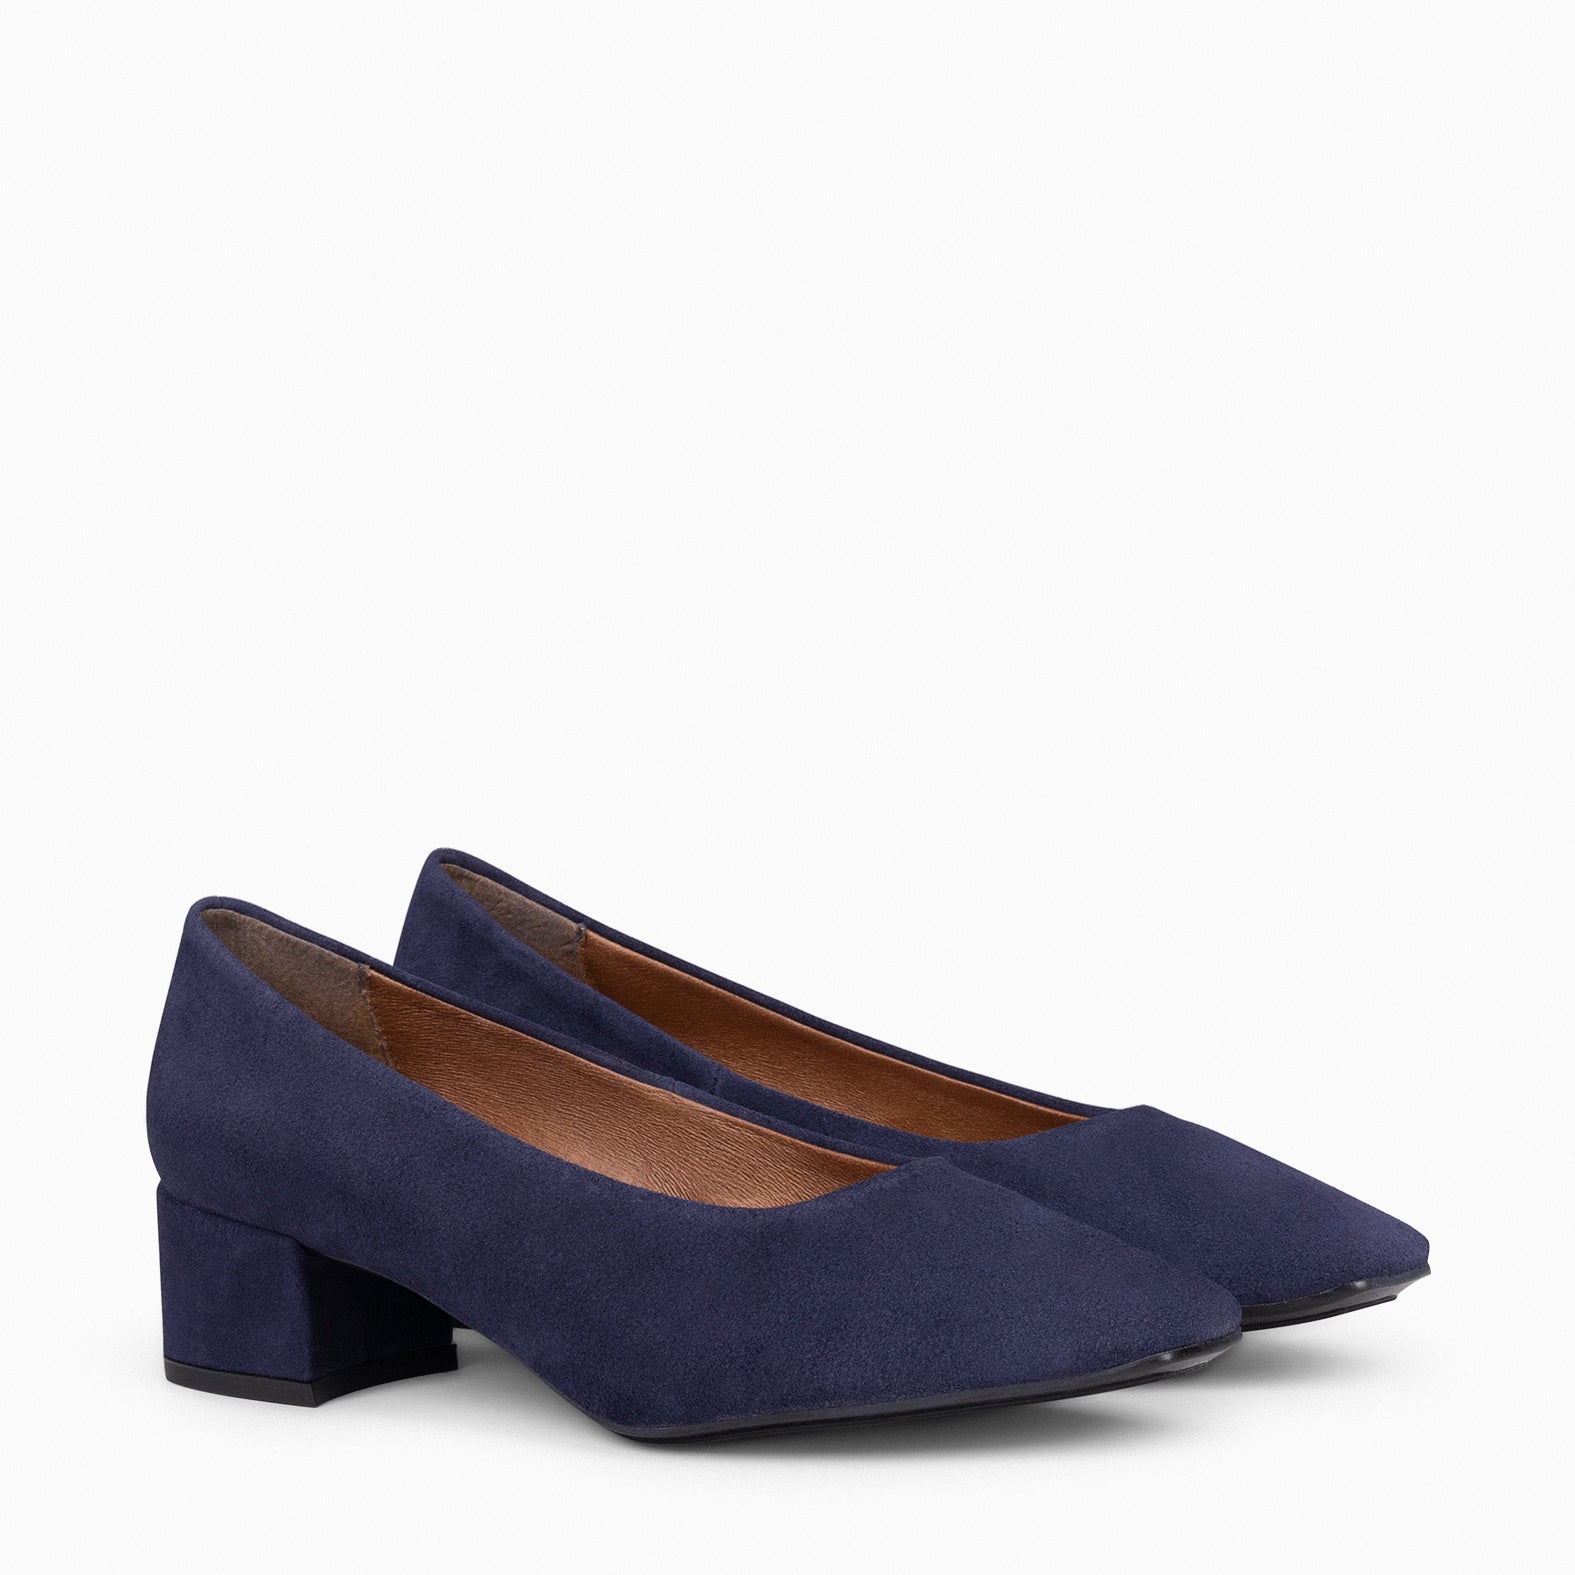 URBAN LADY – NAVY suede leather low heels 